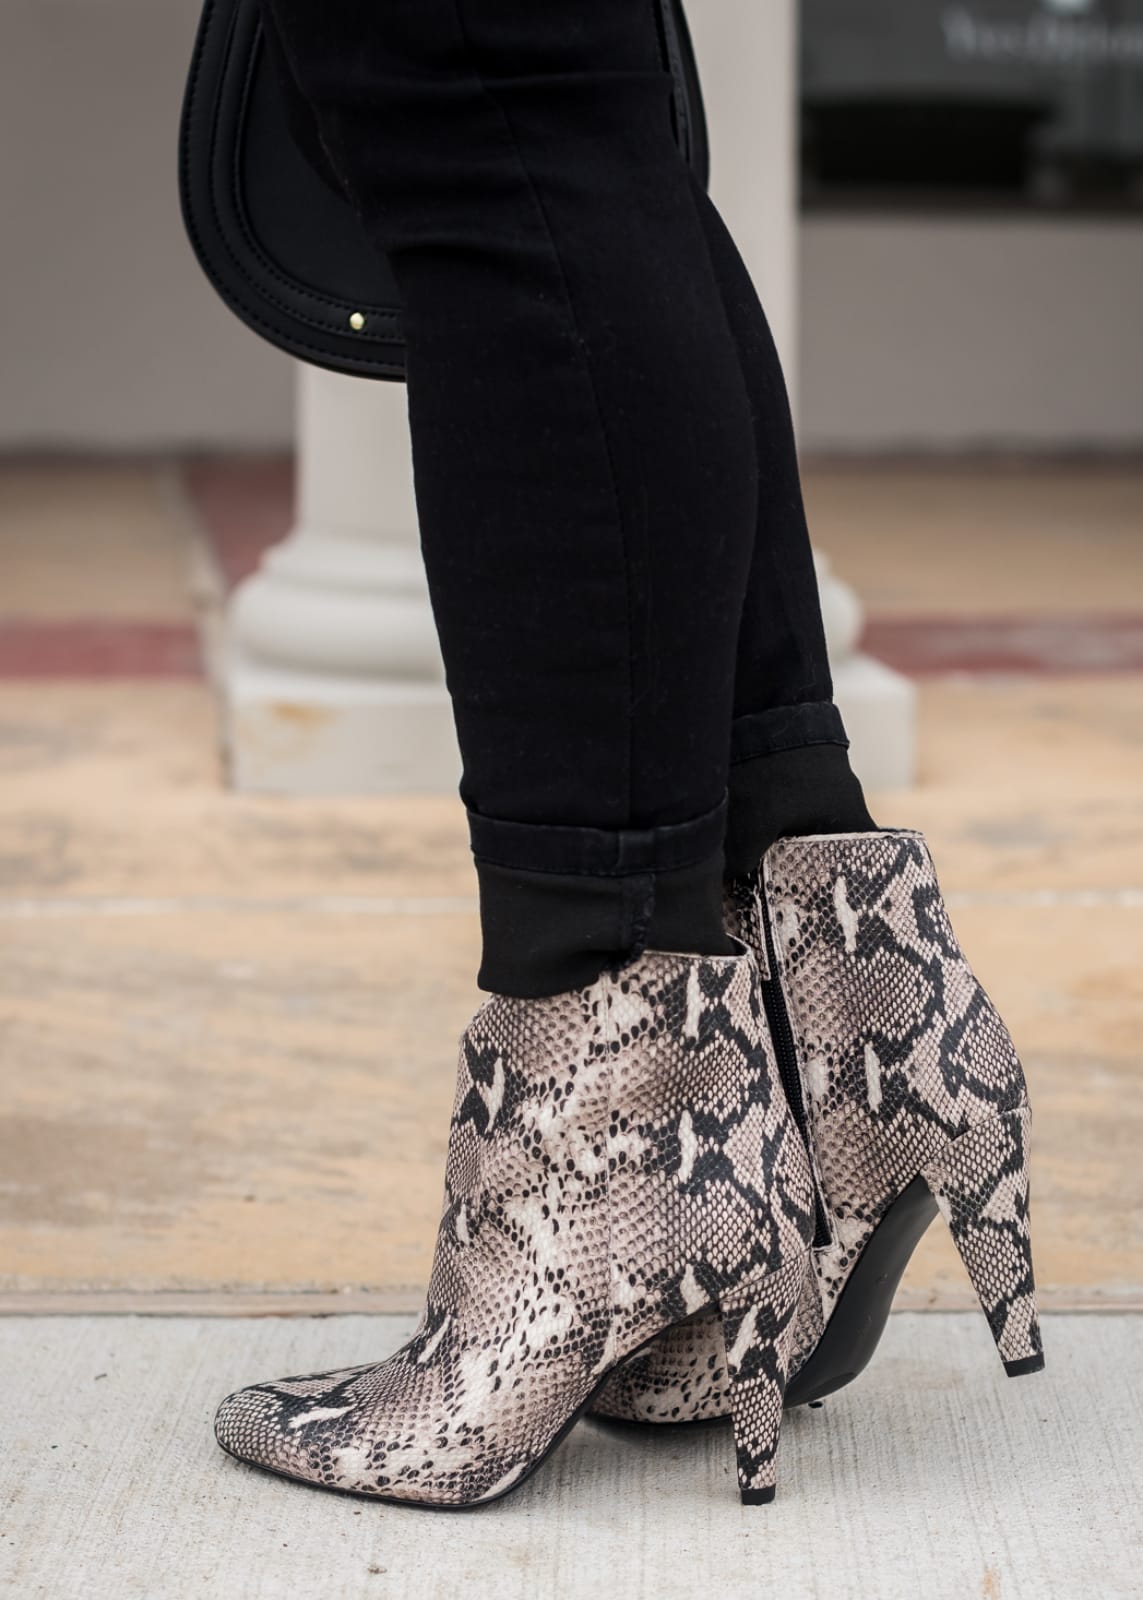 How to Style Ankle Booties - snakeskin boots and black jeans (2)